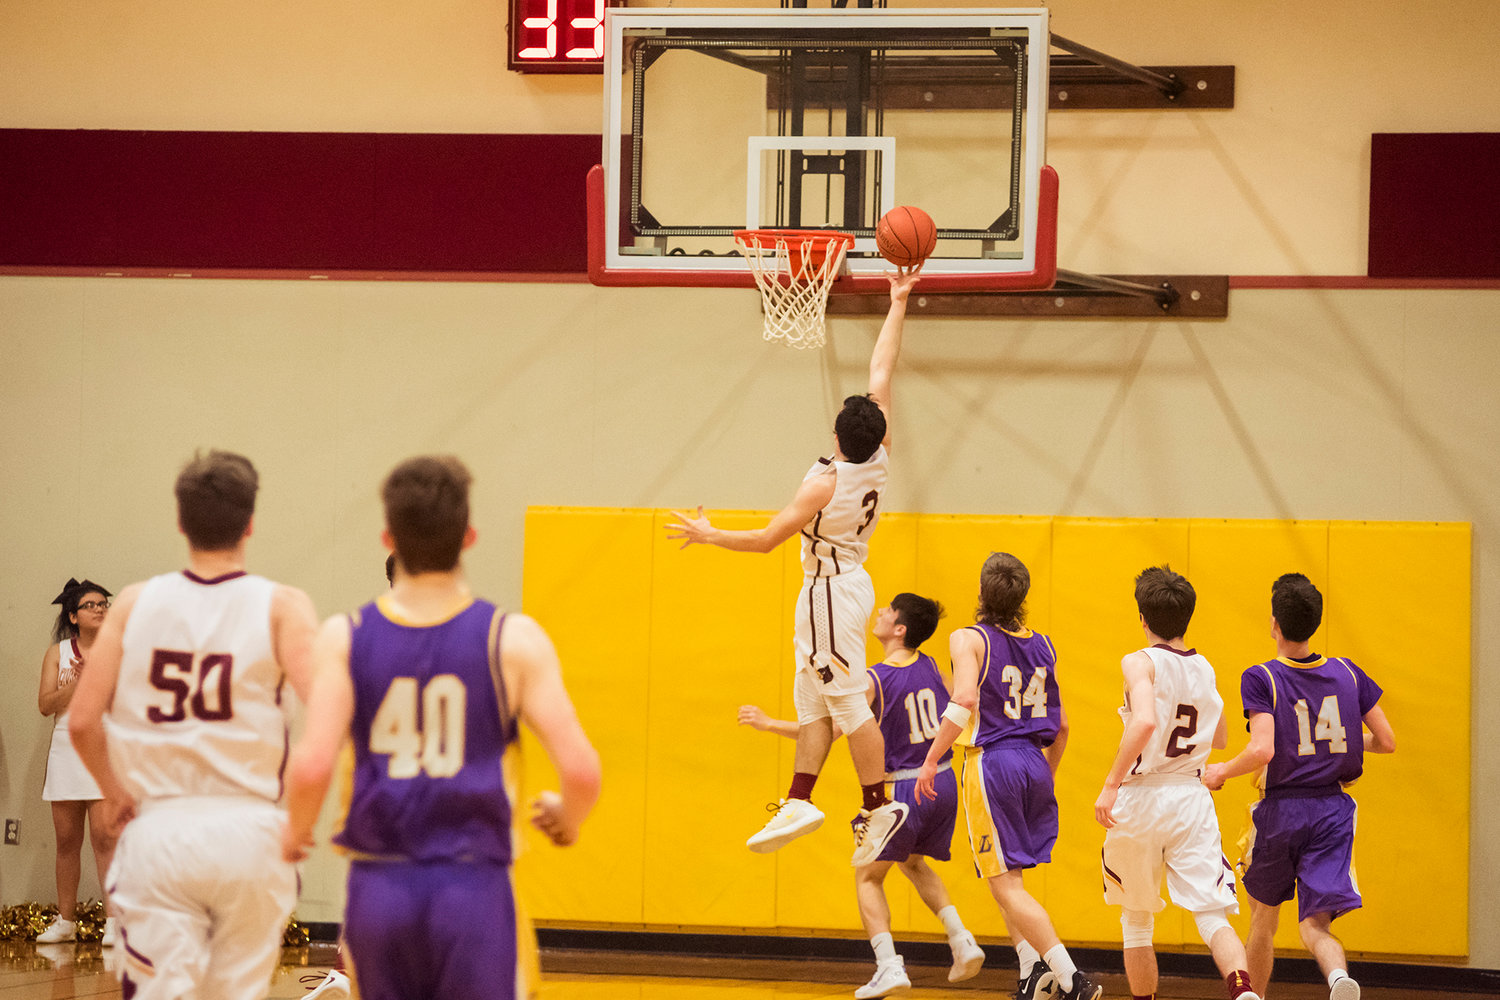 Images from a Central 2B League boys basketball game between Winlock and Onalaska played Wednesday night at Winlock High School.